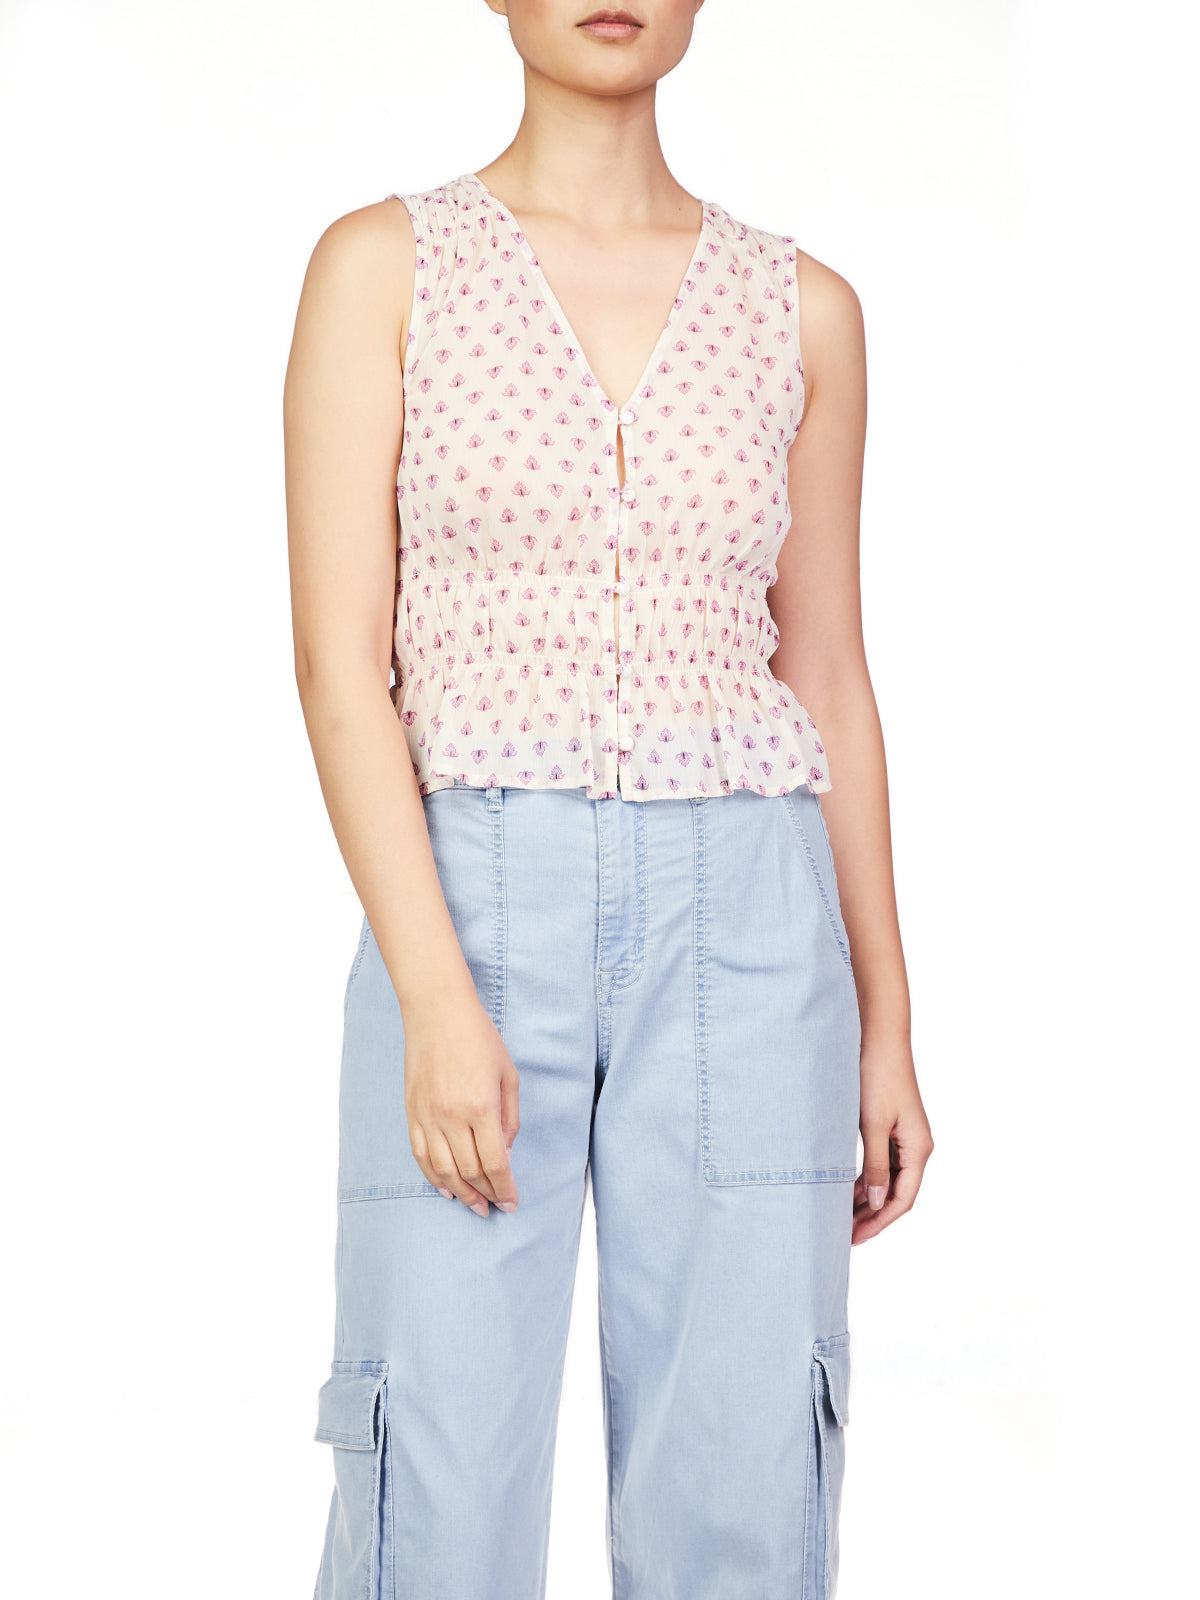 Feather Weight Button Up Top - Lilac Crest